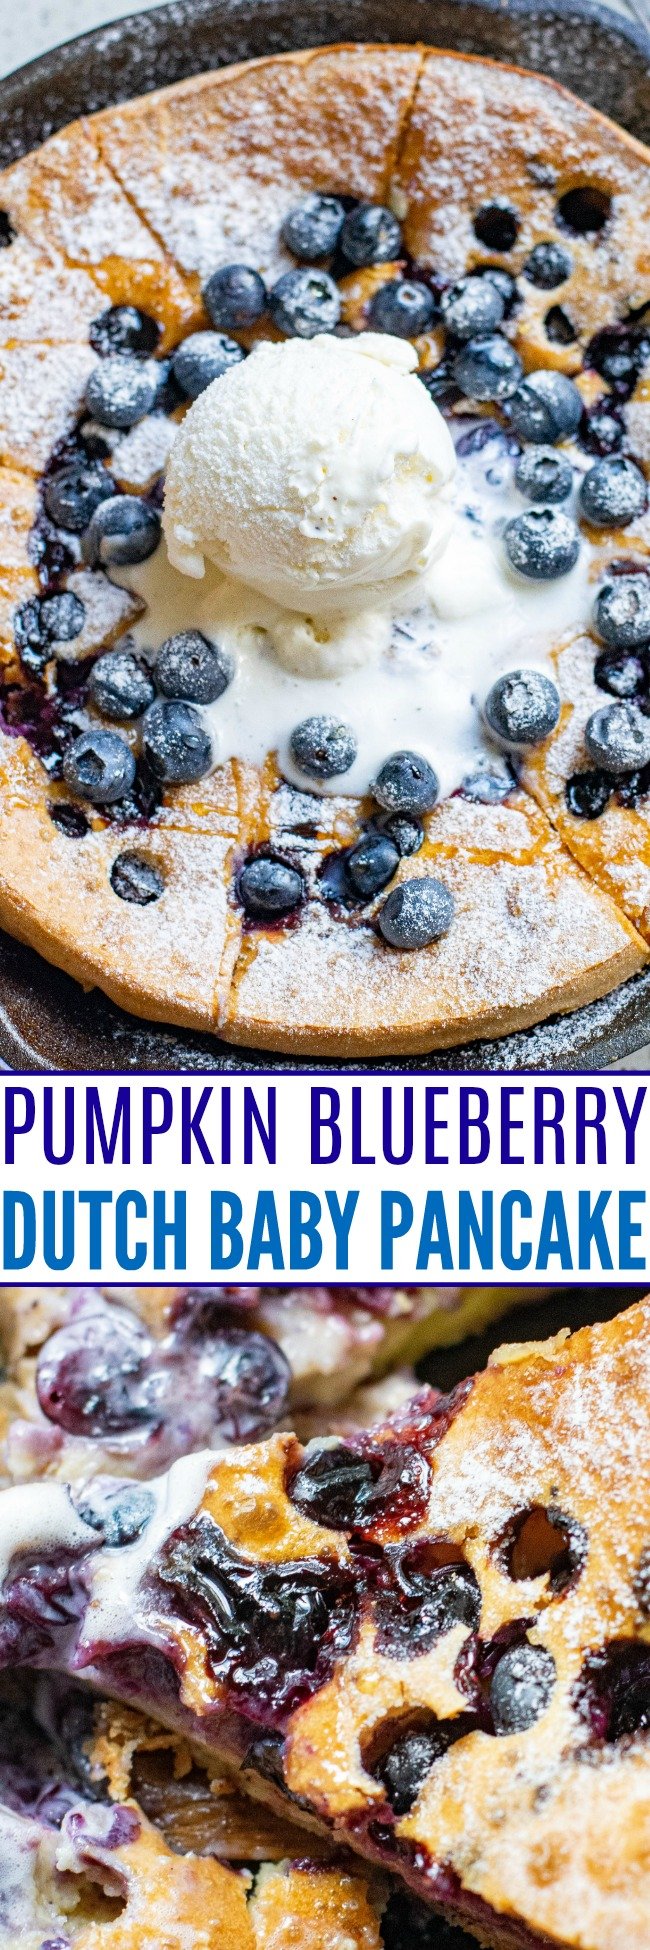 Pumpkin Blueberry Dutch Baby Pancake - One big oven-baked pancake so there's nothing to stand around waiting to flip!! The batter is made in the blender making this the EASIEST pancake ever! Gluten-free and dairy-free options provided!!